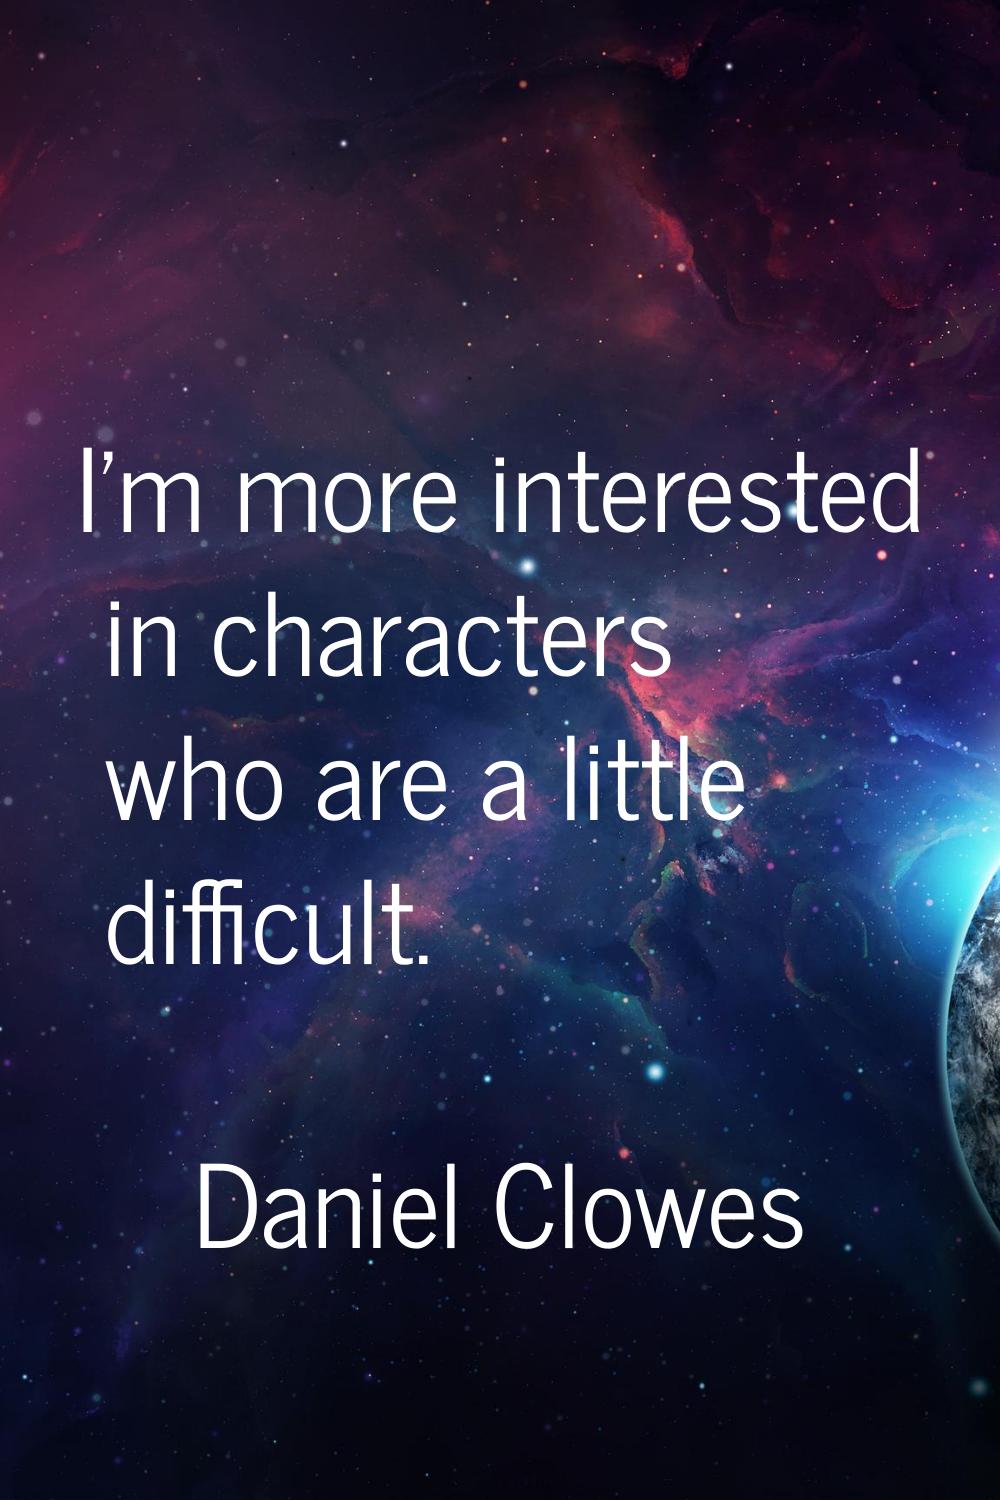 I'm more interested in characters who are a little difficult.